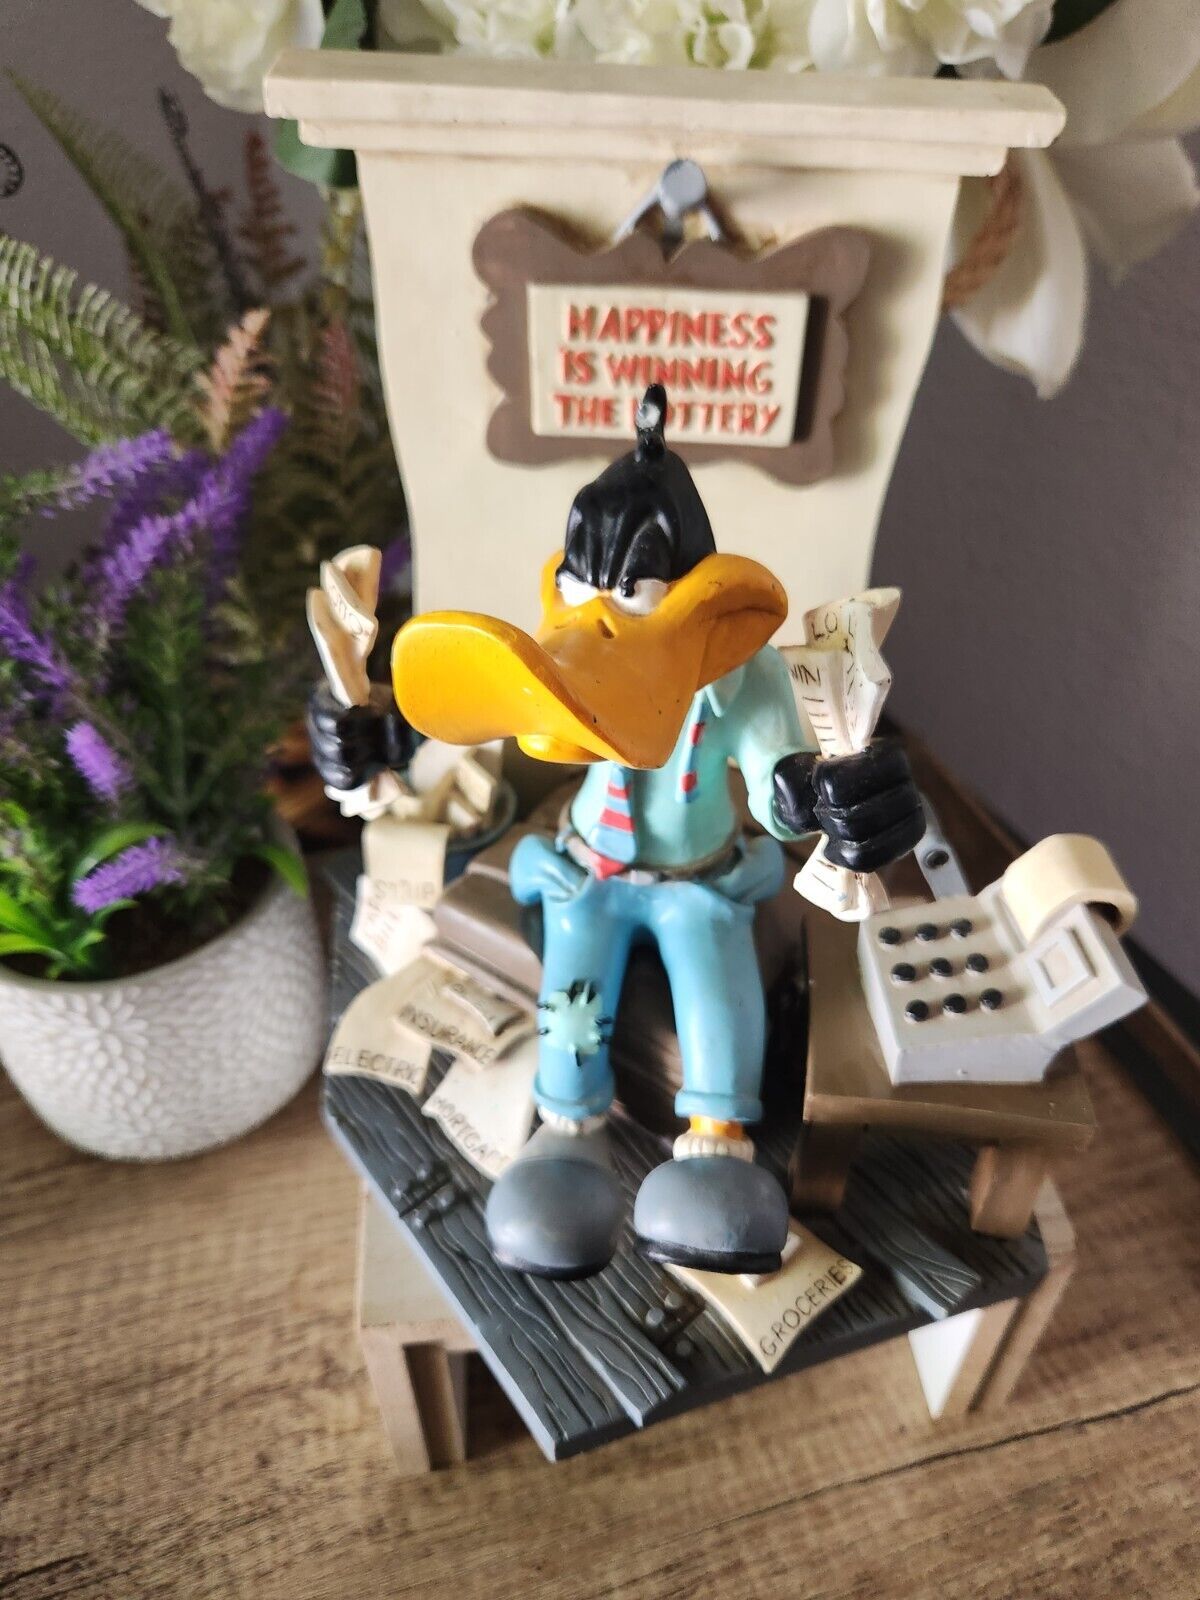 Rare Warner Brothers Daffy Duck Statue Happiness is Winning the Lottery